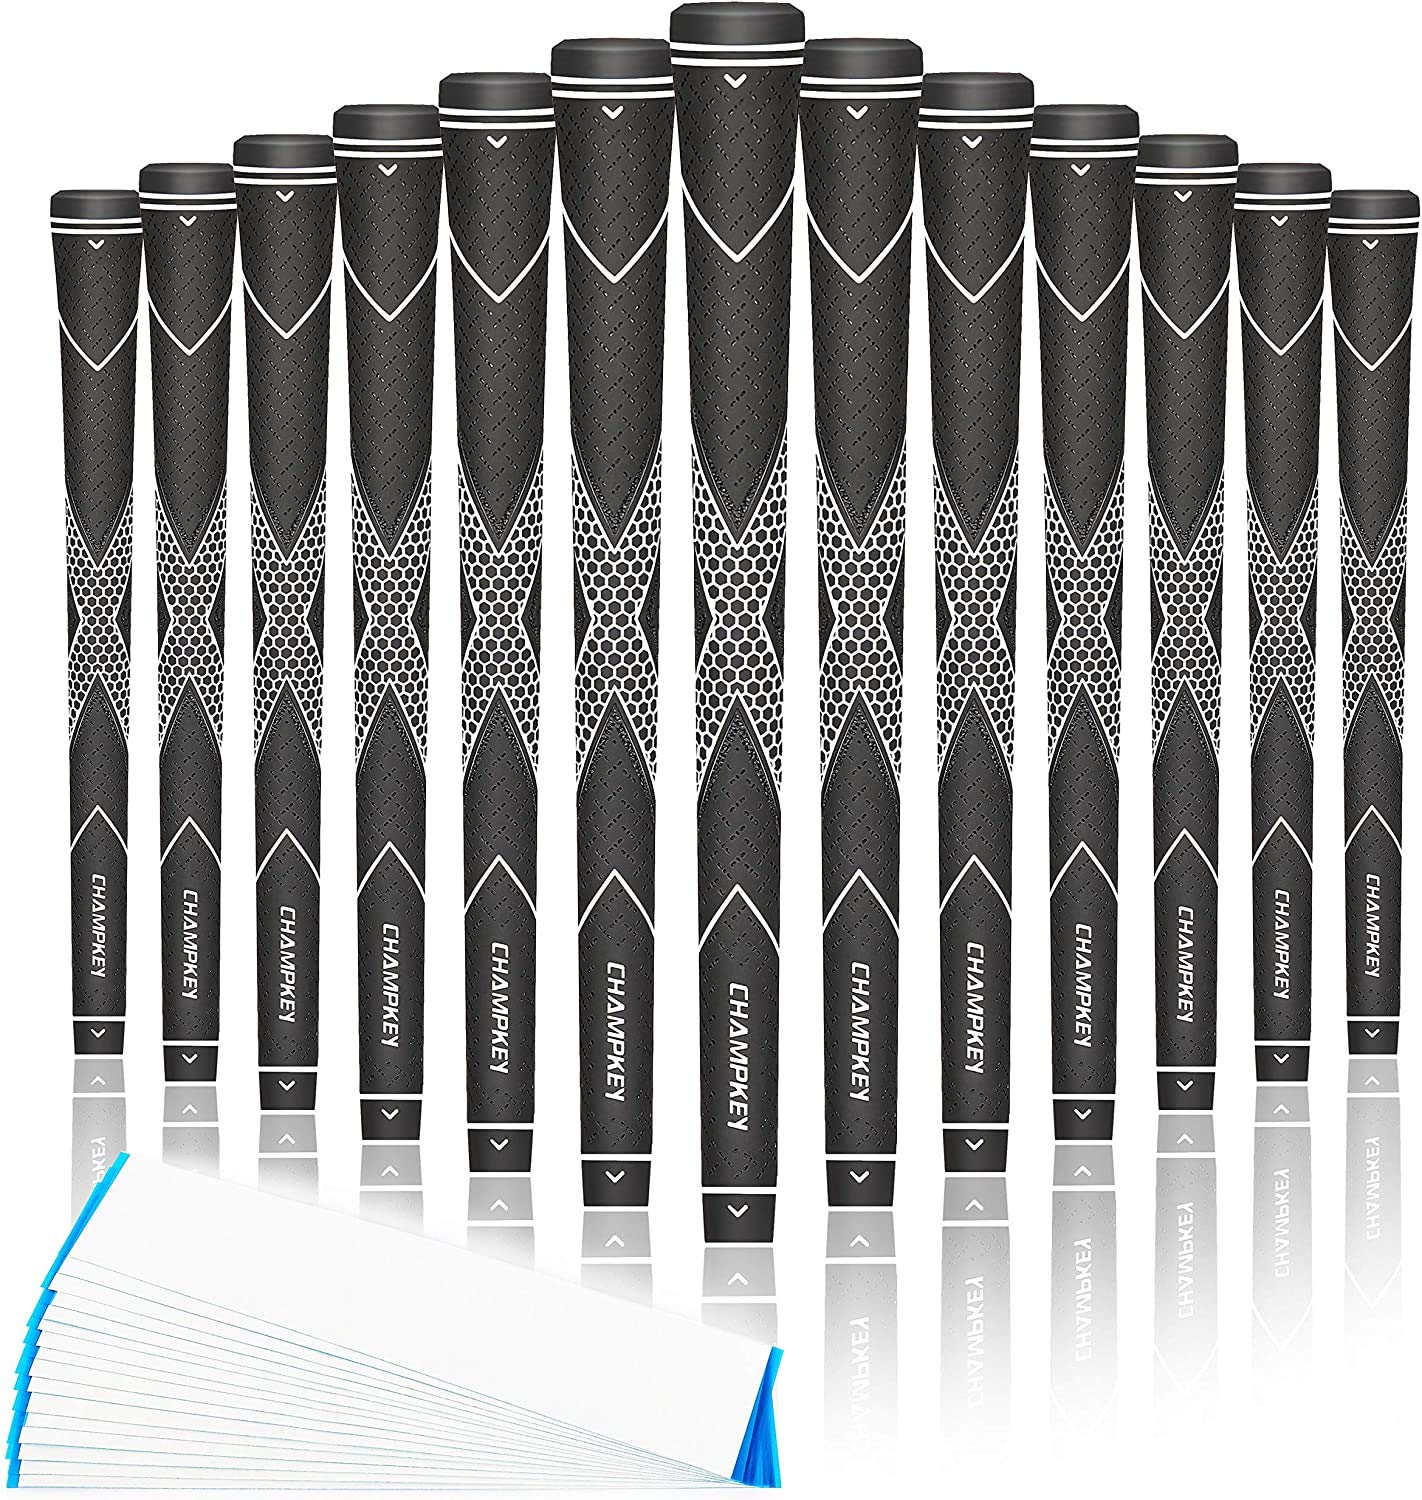 Champkey Premium Rubber Golf Grips (13 Pack) - High Traction & Feedback